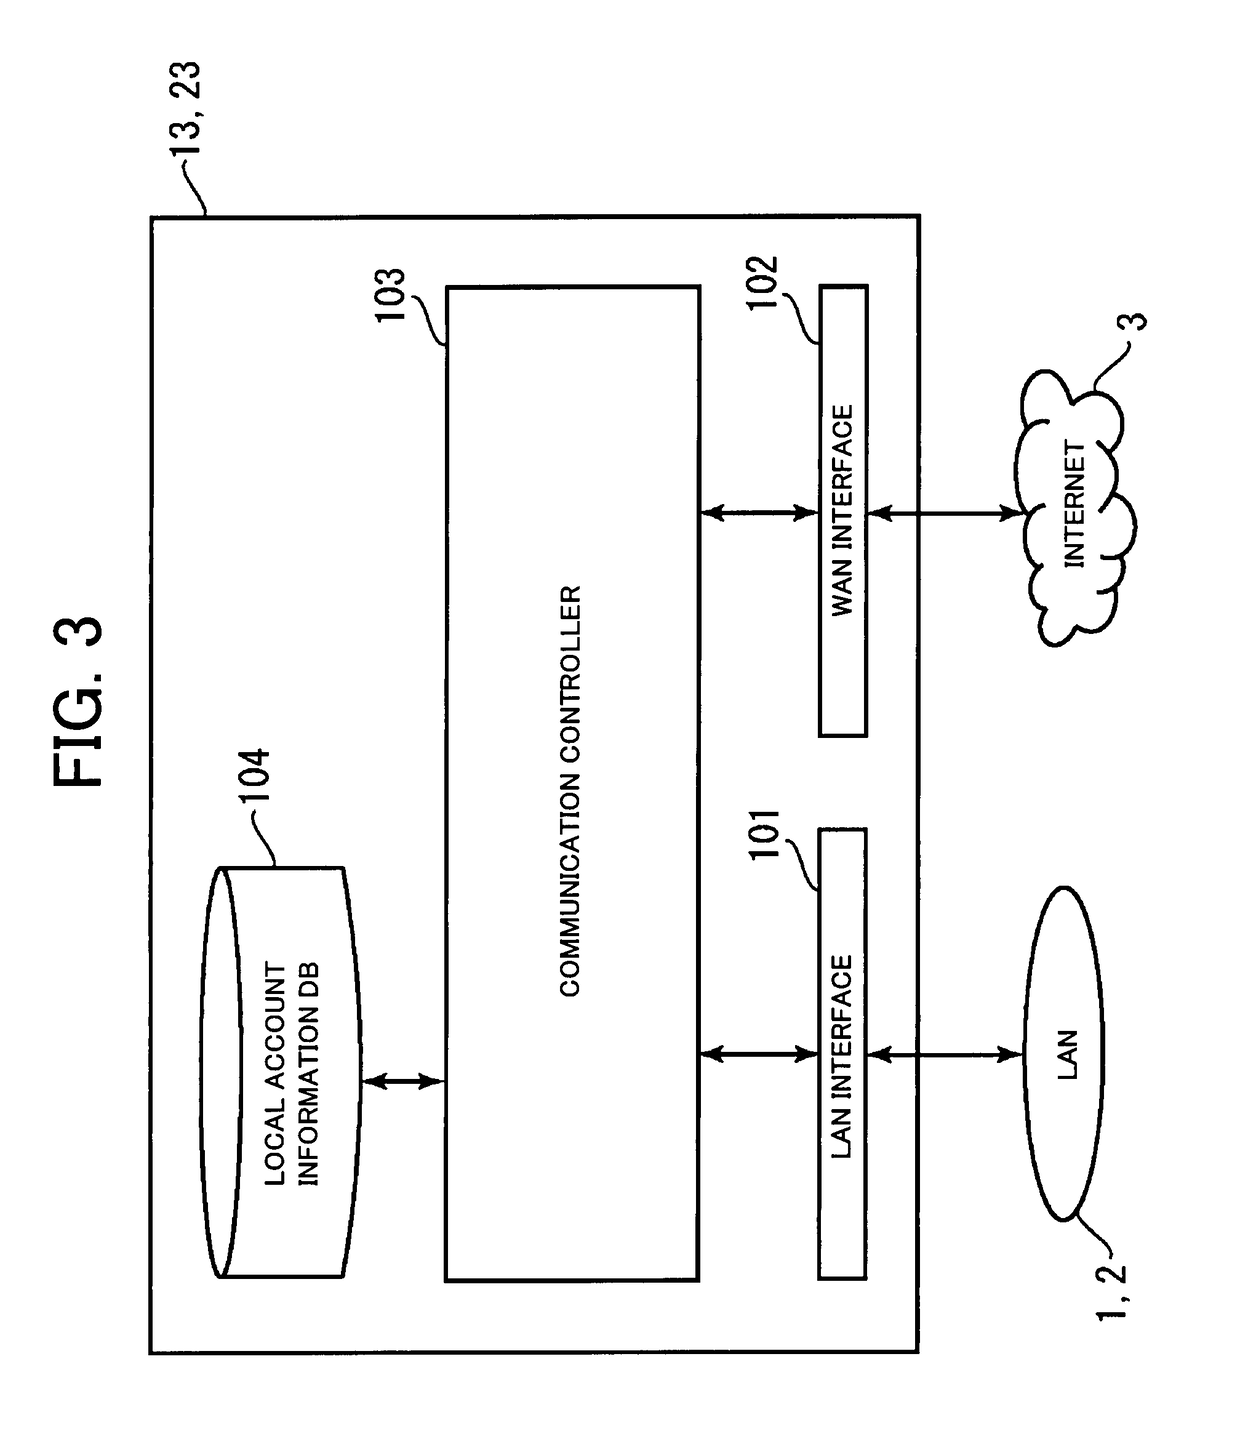 Relay-server arranged to carry out communications between communication terminals on different LANS